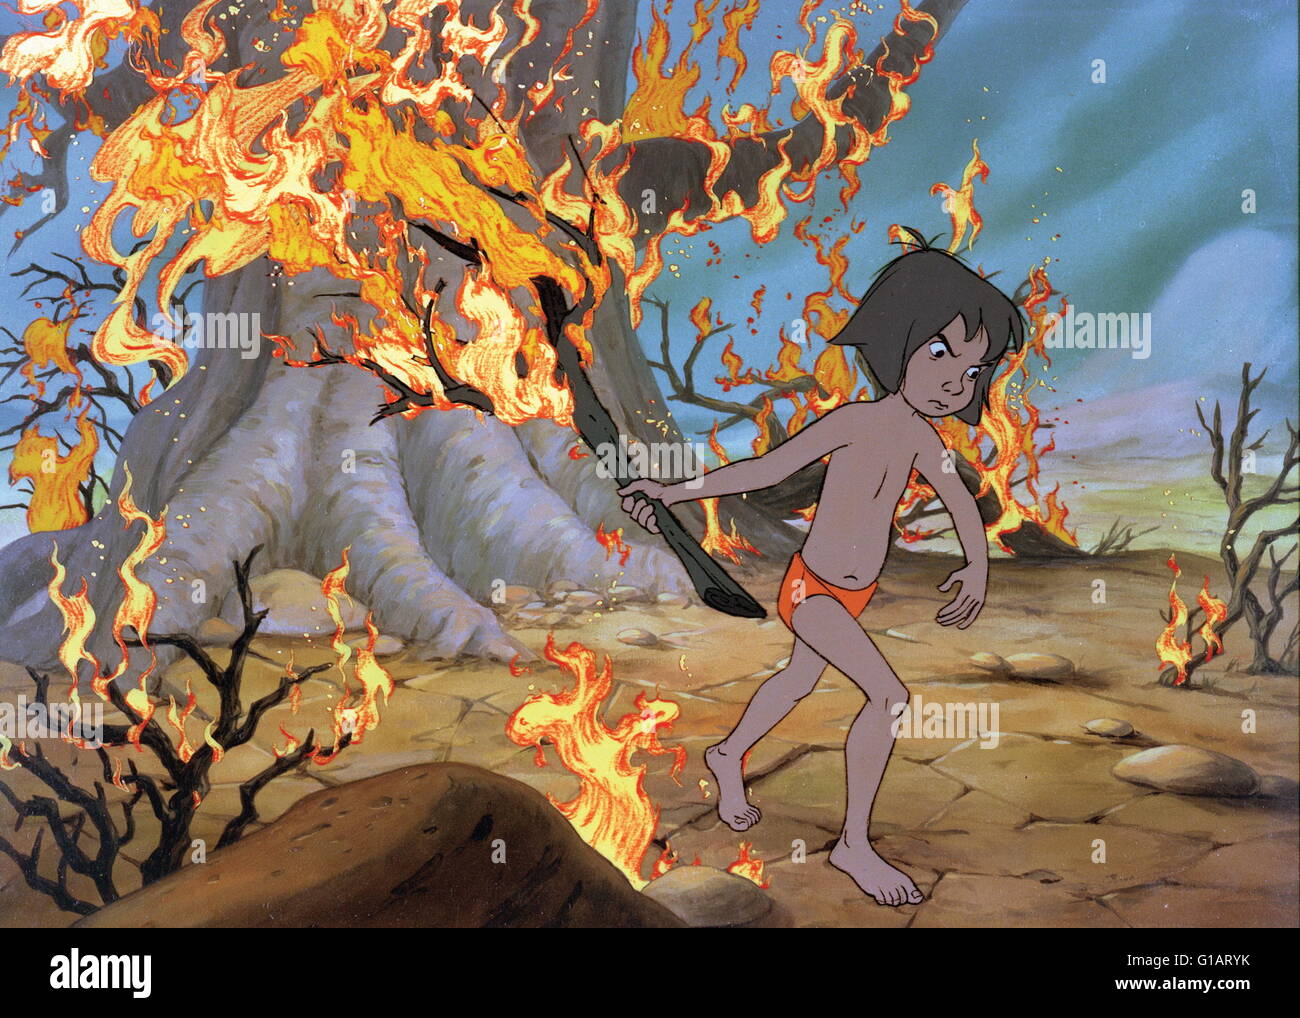 RELEASE DATE: October 18, 1967 DIRECTOR: Wolfgang Reitherman STUDIO: Walt Disney Productions PLOT: Disney animation inspired by Rudyard Kiplings 'Mowgli' story. Mowgli is a boy who has been raised by wolves in the Indian jungle. When the wolves hear that the fierce tiger, Shere Kahn, is nearby, they decide to send Mowgli to a local 'man tribe'. On his way to the village, Mowgli meets many animal characters in this musical tale. When Shere Kahn learns of Mowgli's presence, he tracks him down PICTURED: voices Phil Harris, Sebastian Cabot, Louis Prima (Credit Image: c Walt Disney Productions/Ente Stock Photo